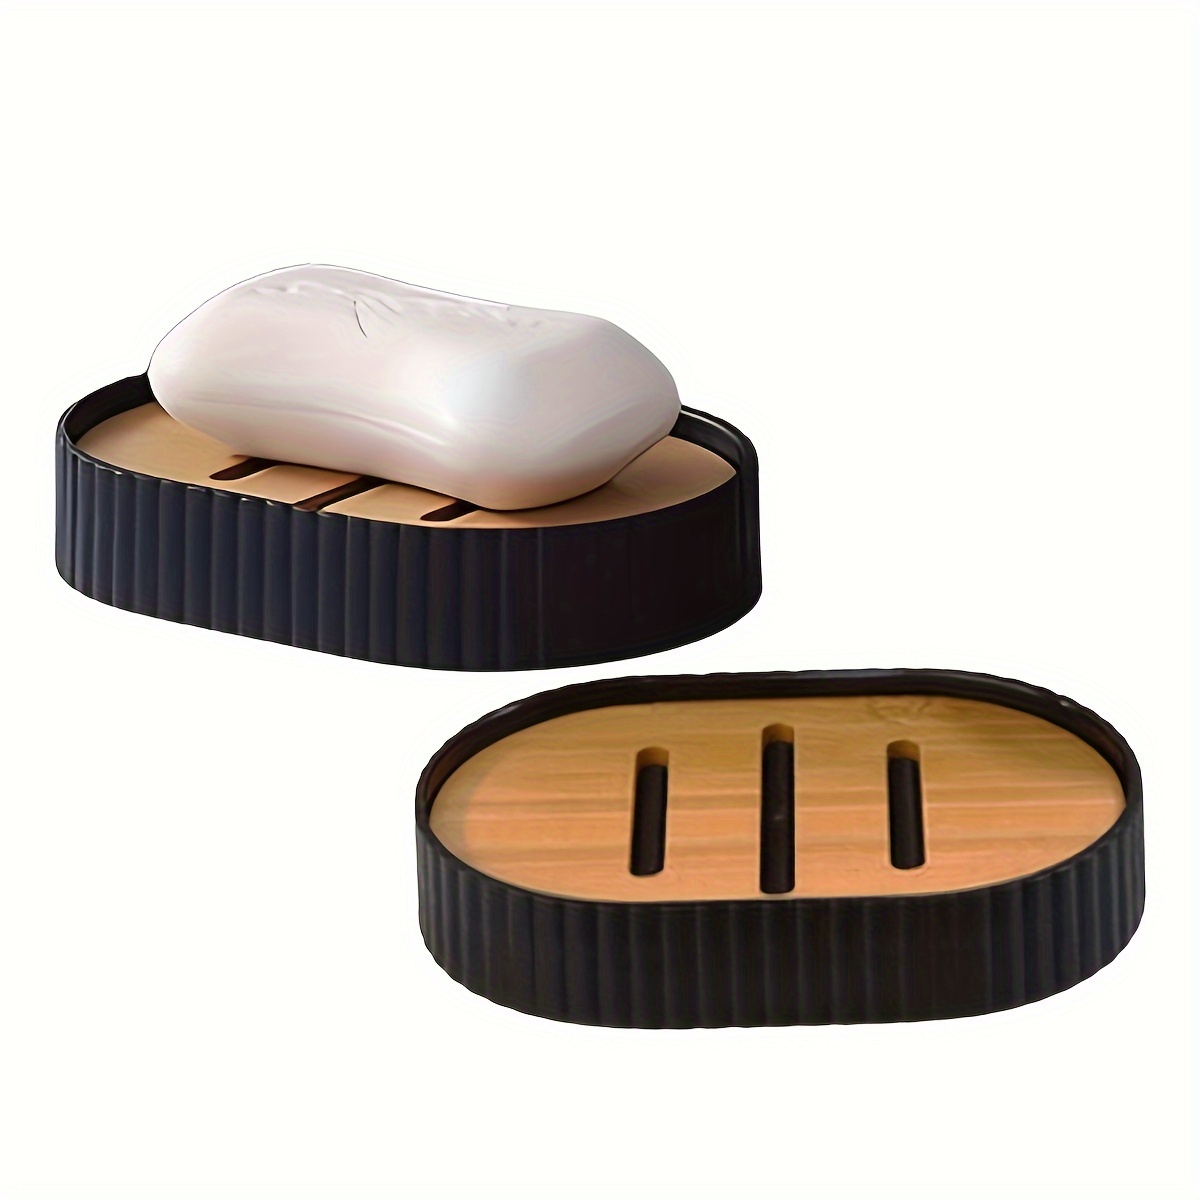 

Elegant Bamboo And Plastic Soap Dish: Keep Your Soaps Dry And Stylish